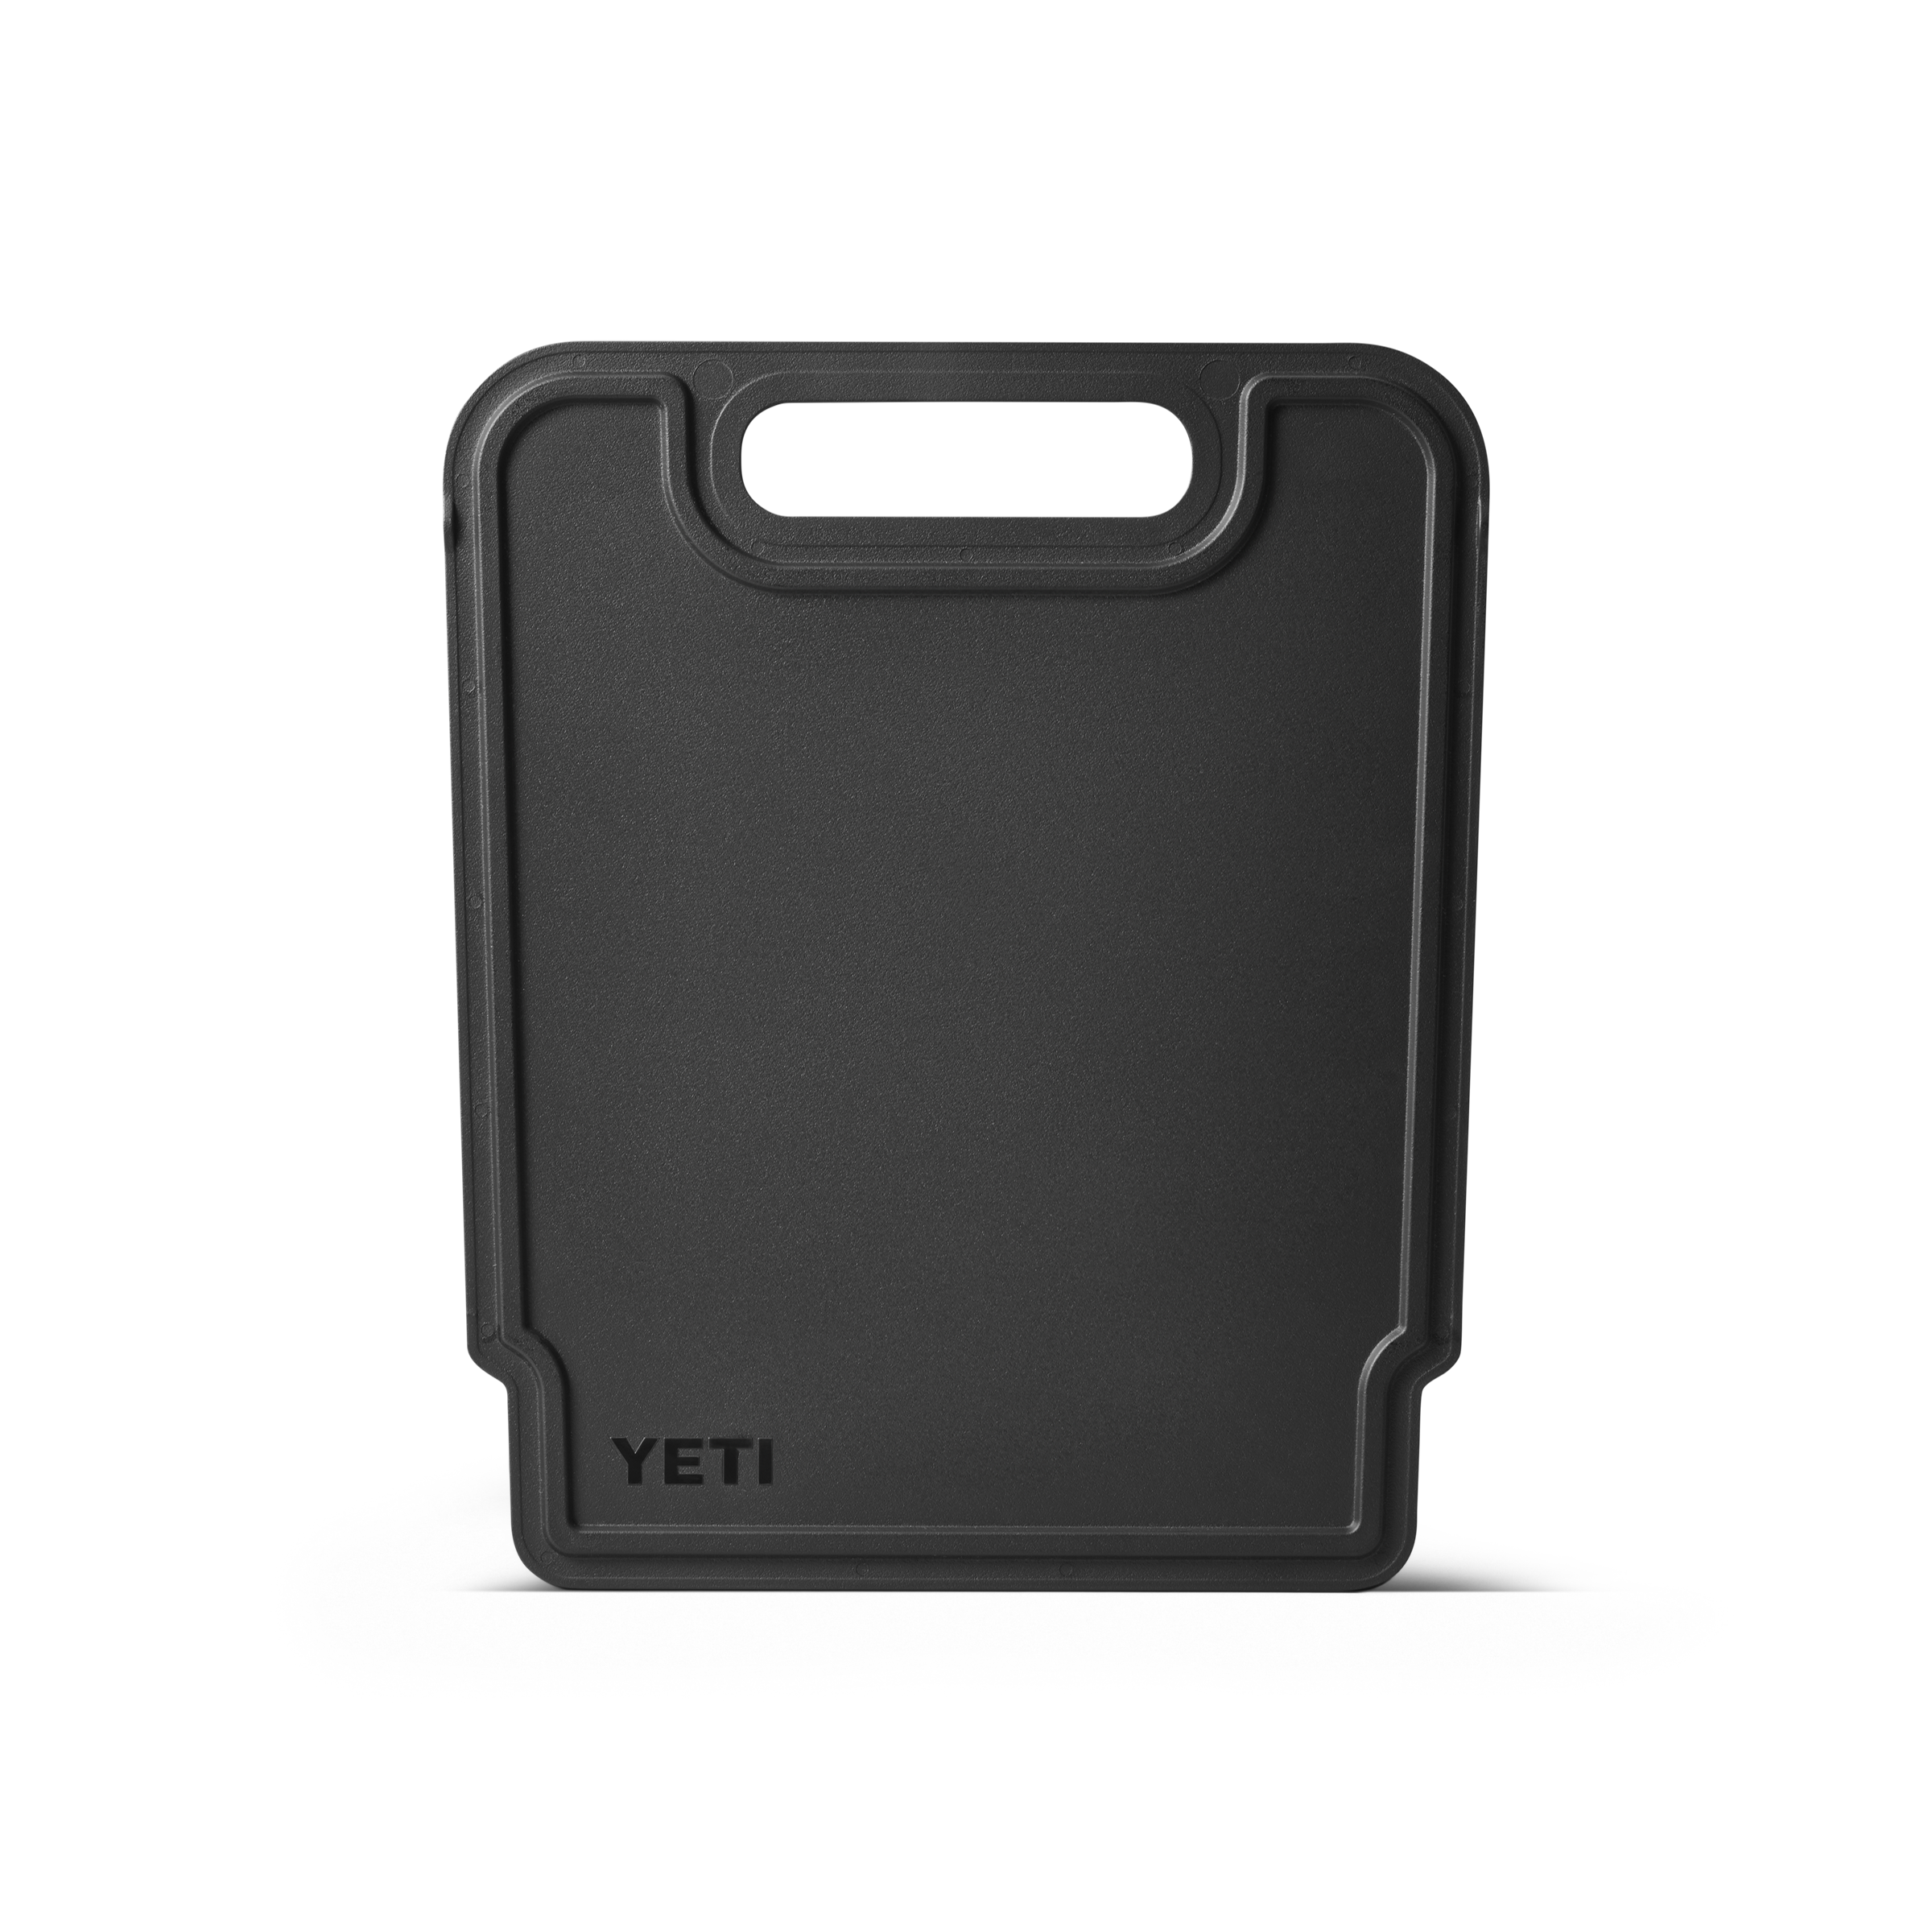 Yeti Coolers Rarely Go on Sale, but Right Now the Brand Is Slashing Prices  on Coolers and Drinkware